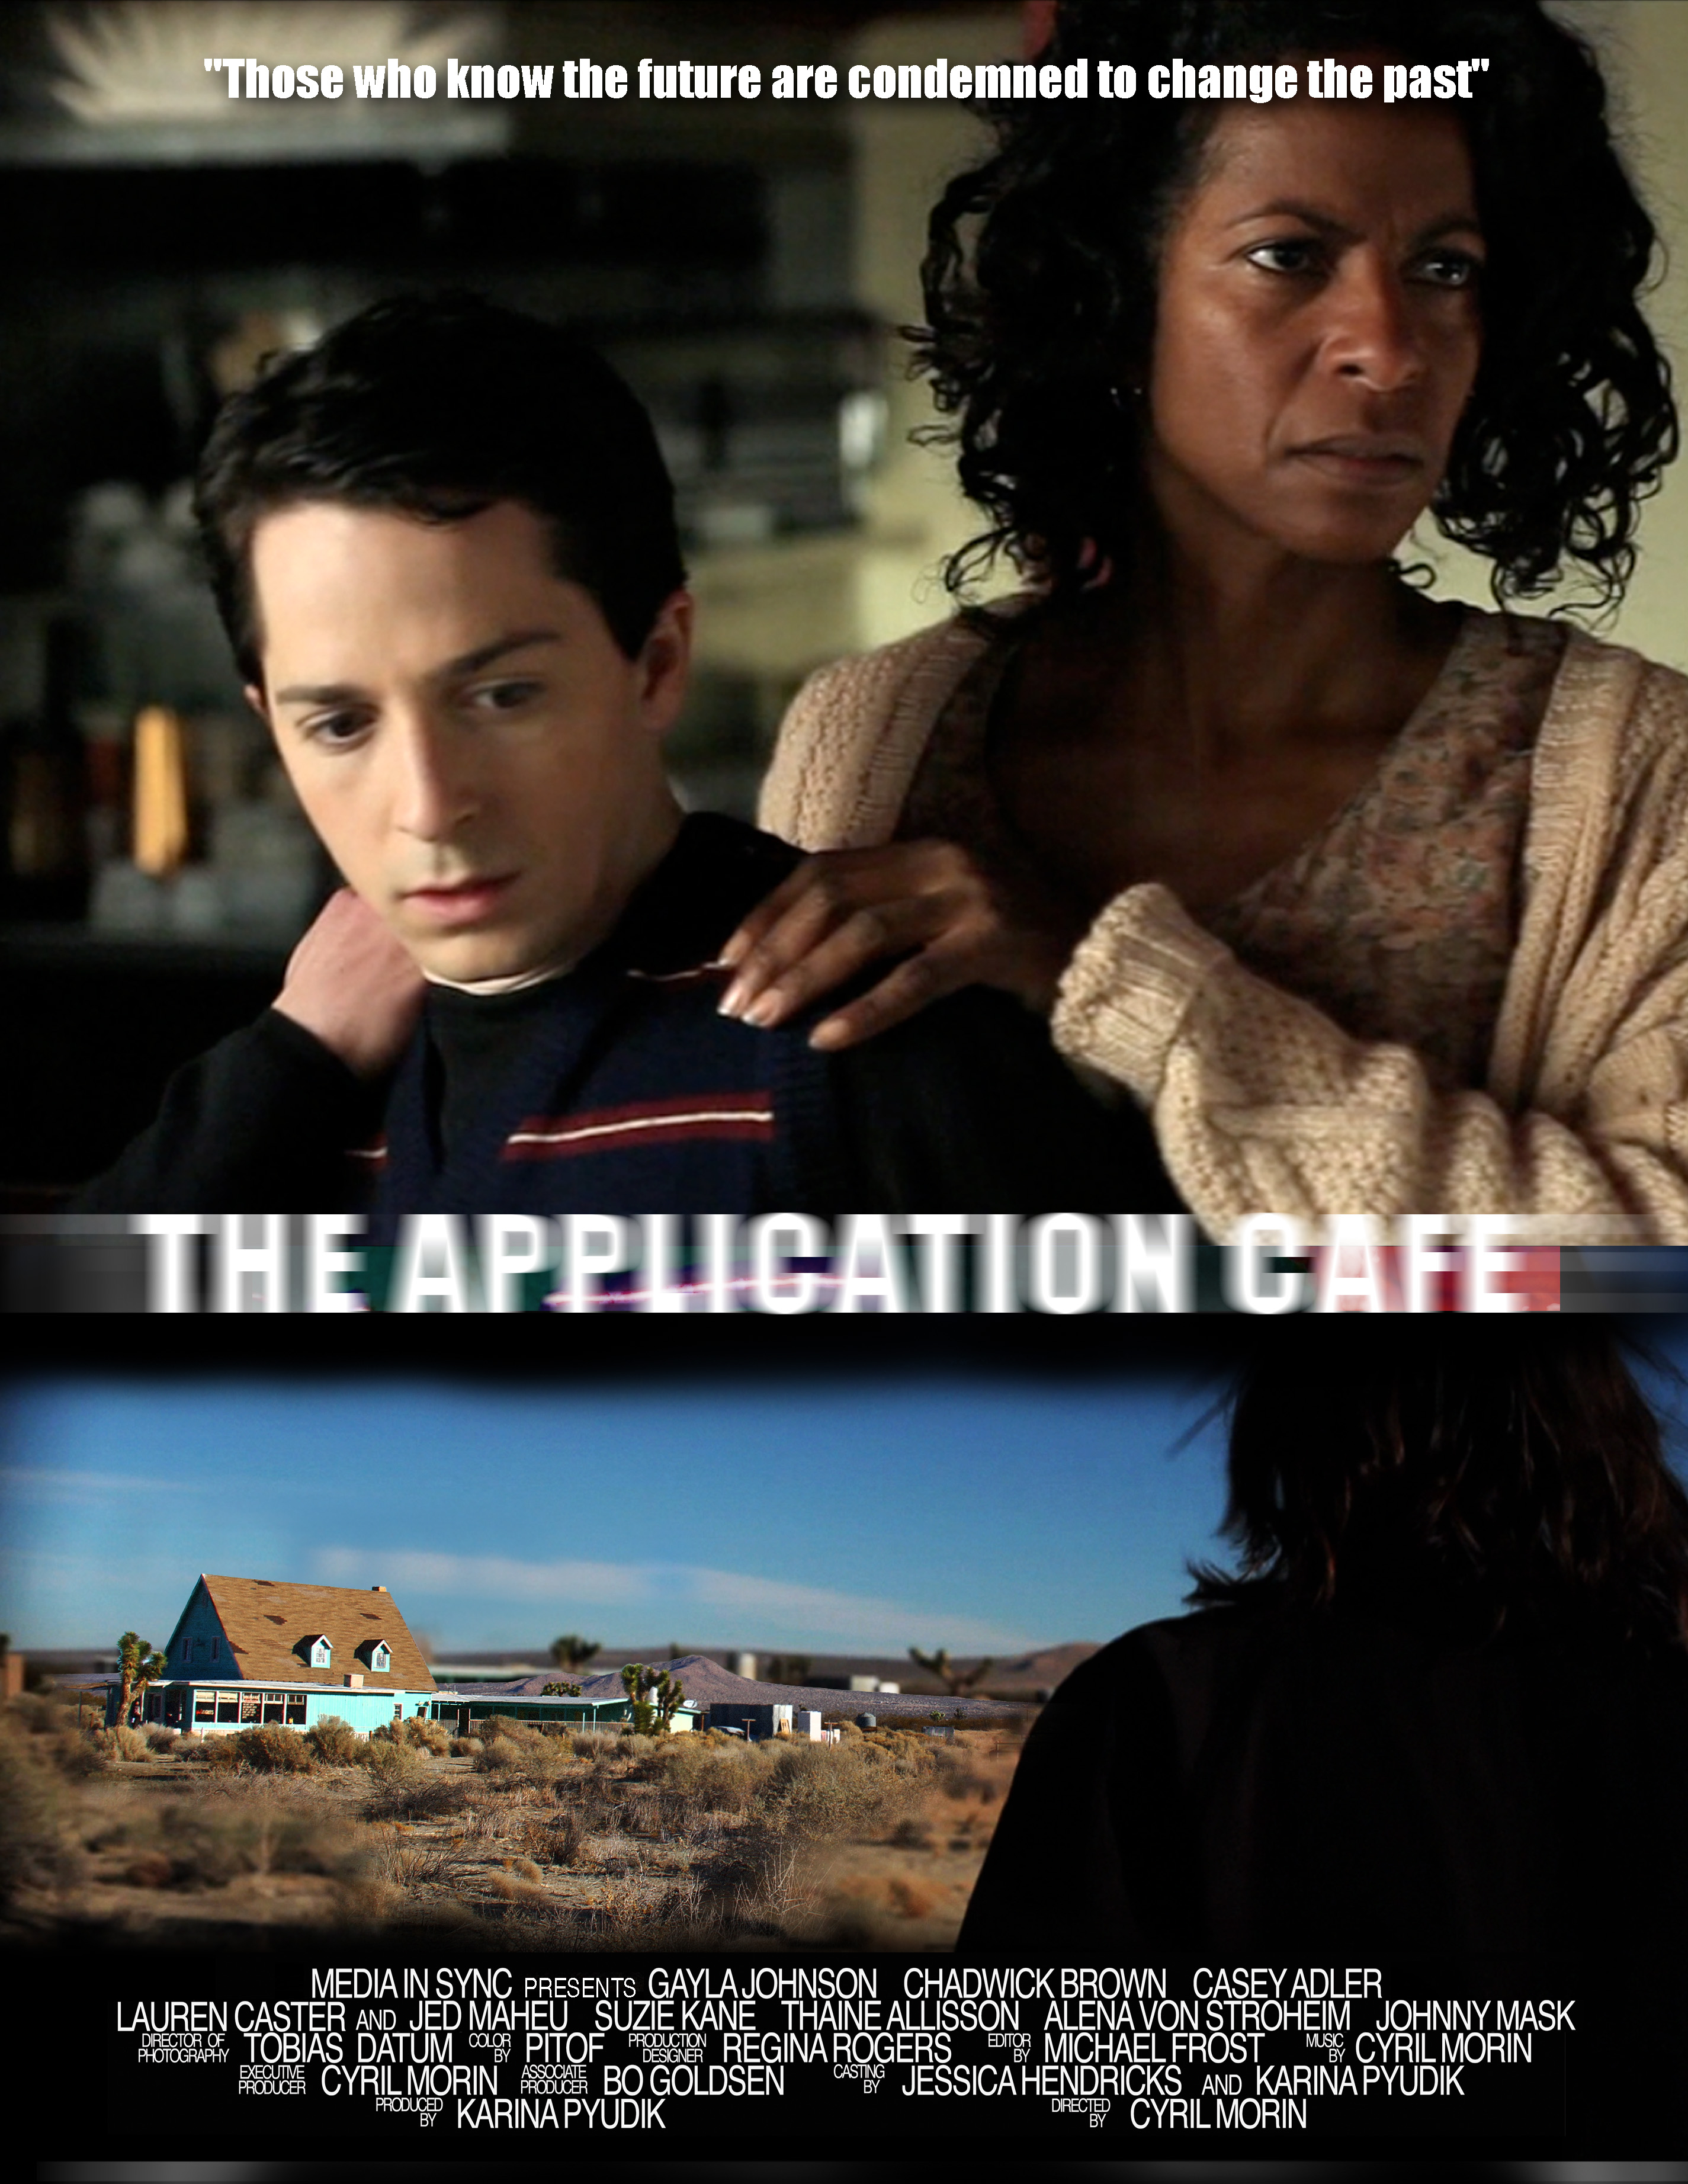 Application Cafe, a Film, Starring Gayla Johnson as Stacy, LEAD ACTRESS. Directed by CYRIL MORIN